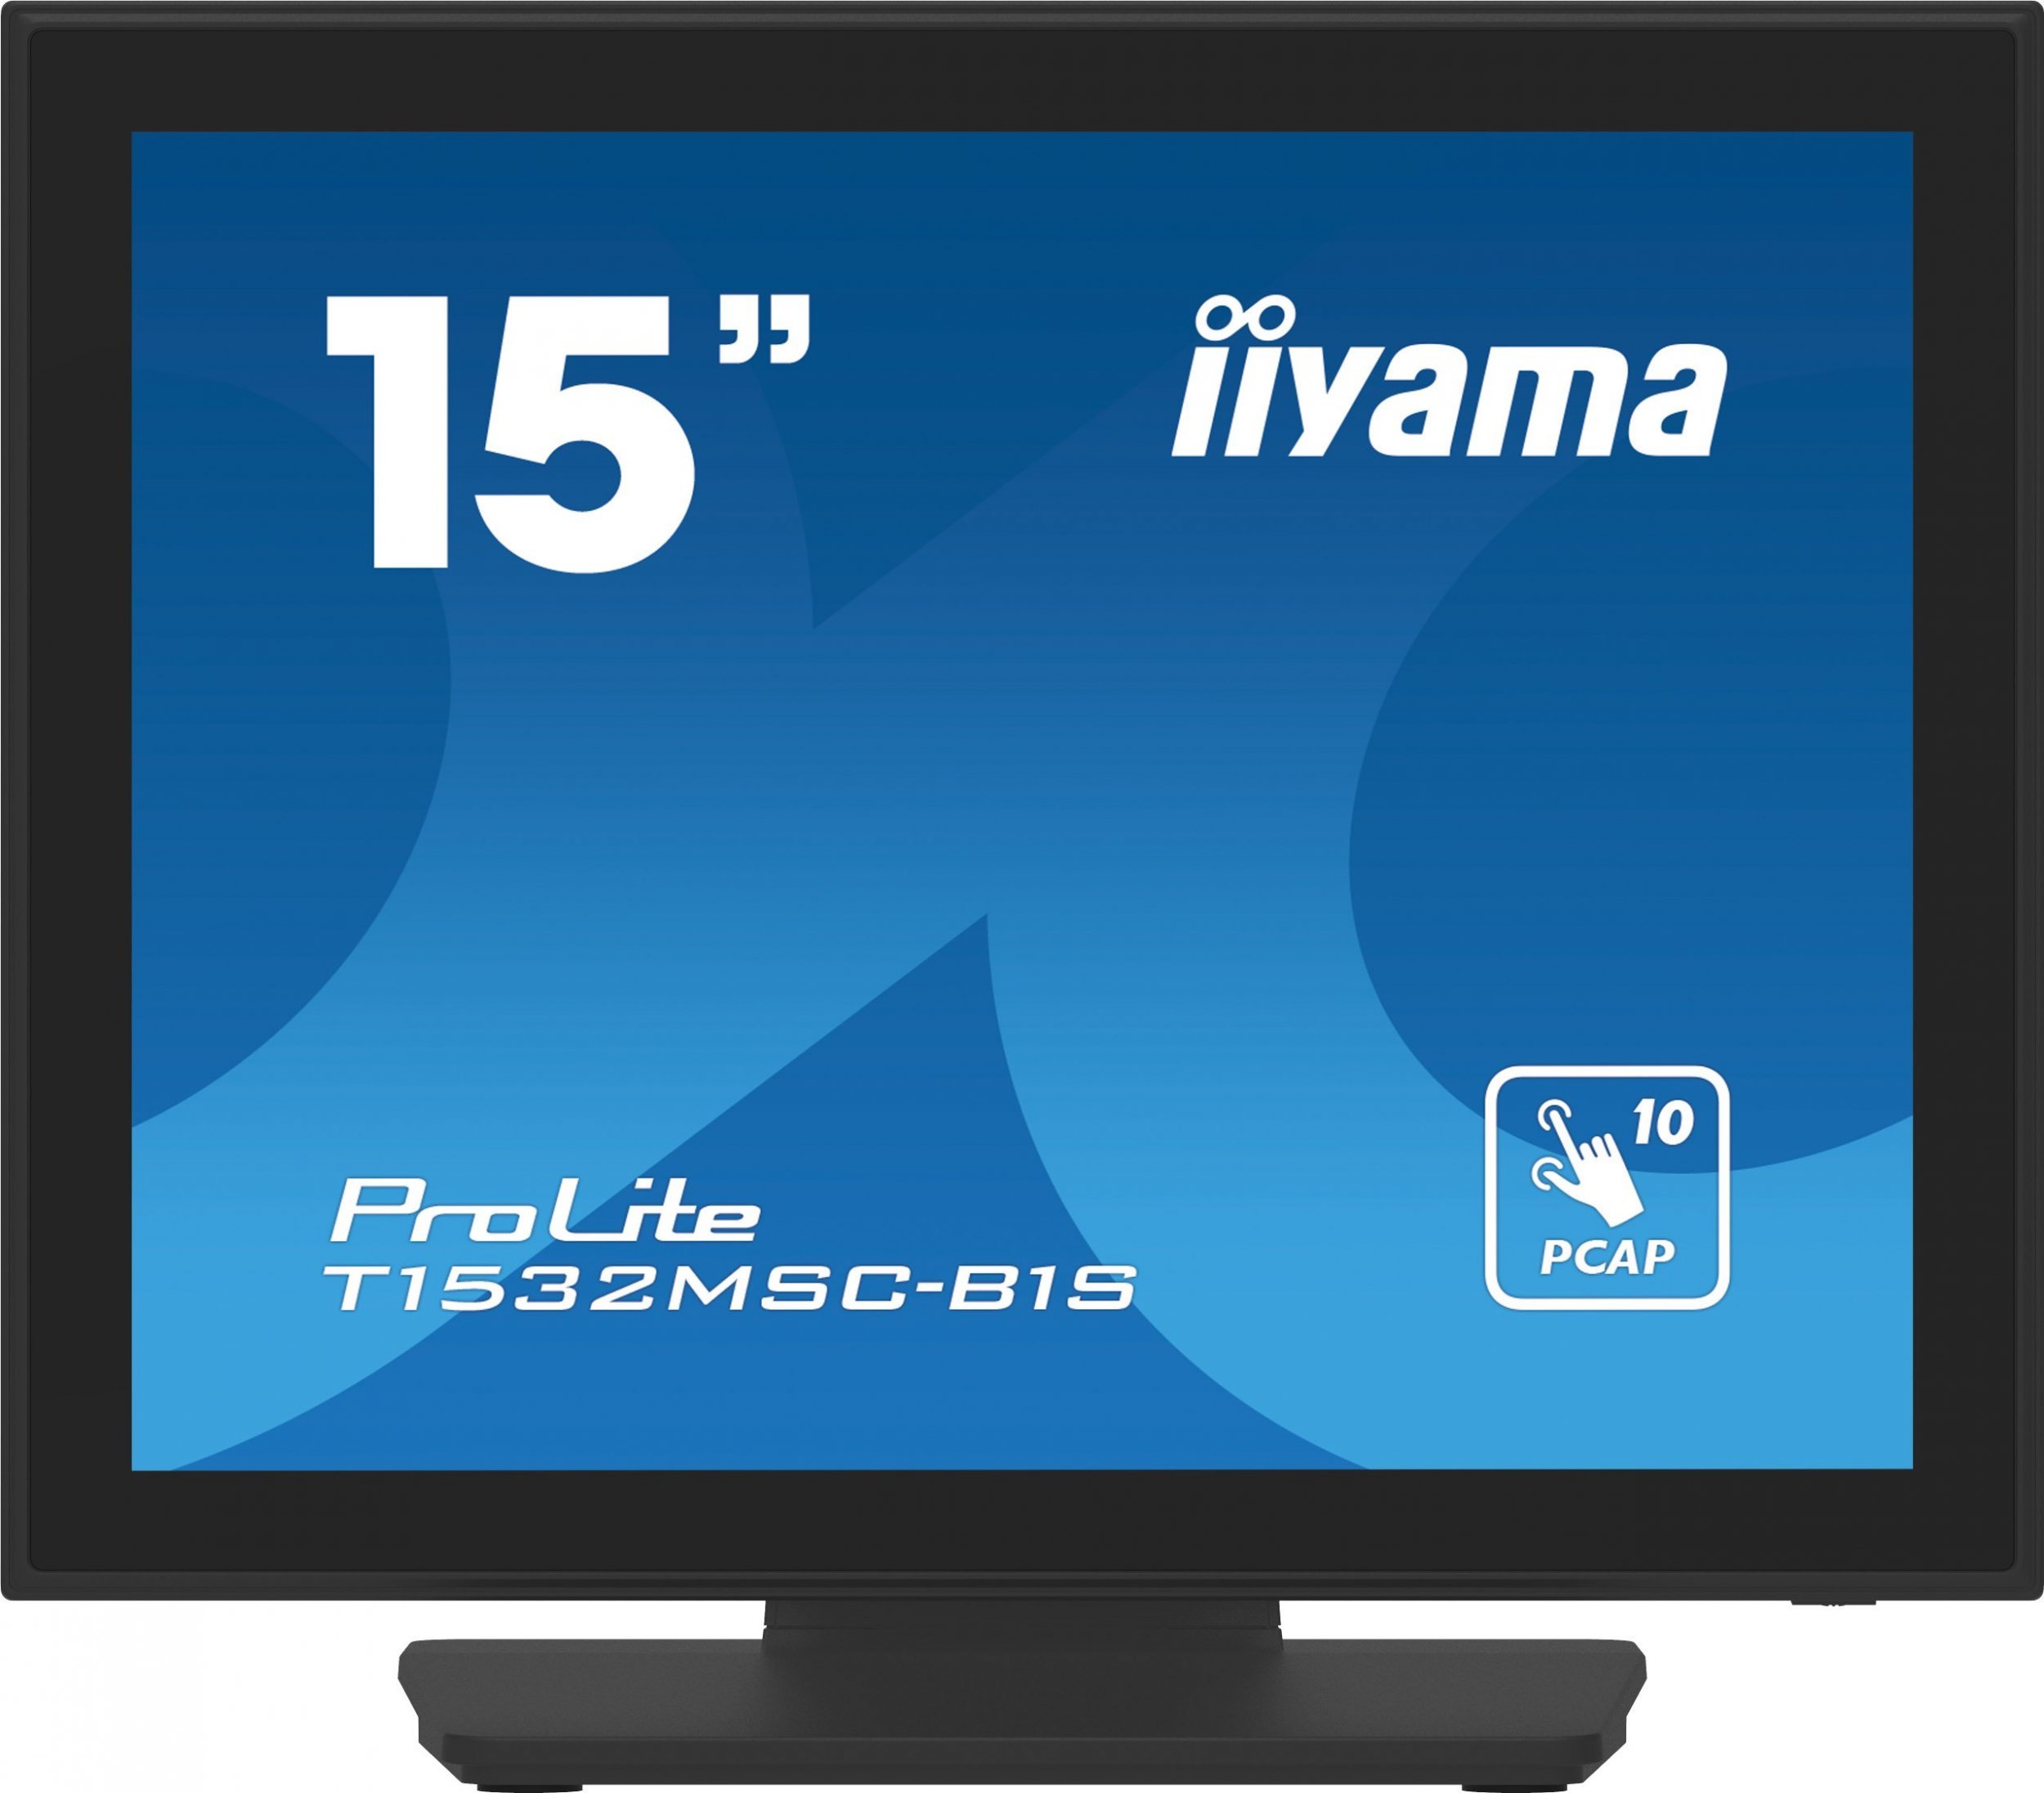 Monitor iiyama 15` PCAP Bezel Free Front, 10P Touch, 1024x768, Speakers, VGA, DisplayPort, HDMI,330cd/m2 (with touch), USB Interface, Built-In Power Adapter, Multitouch with supported OS